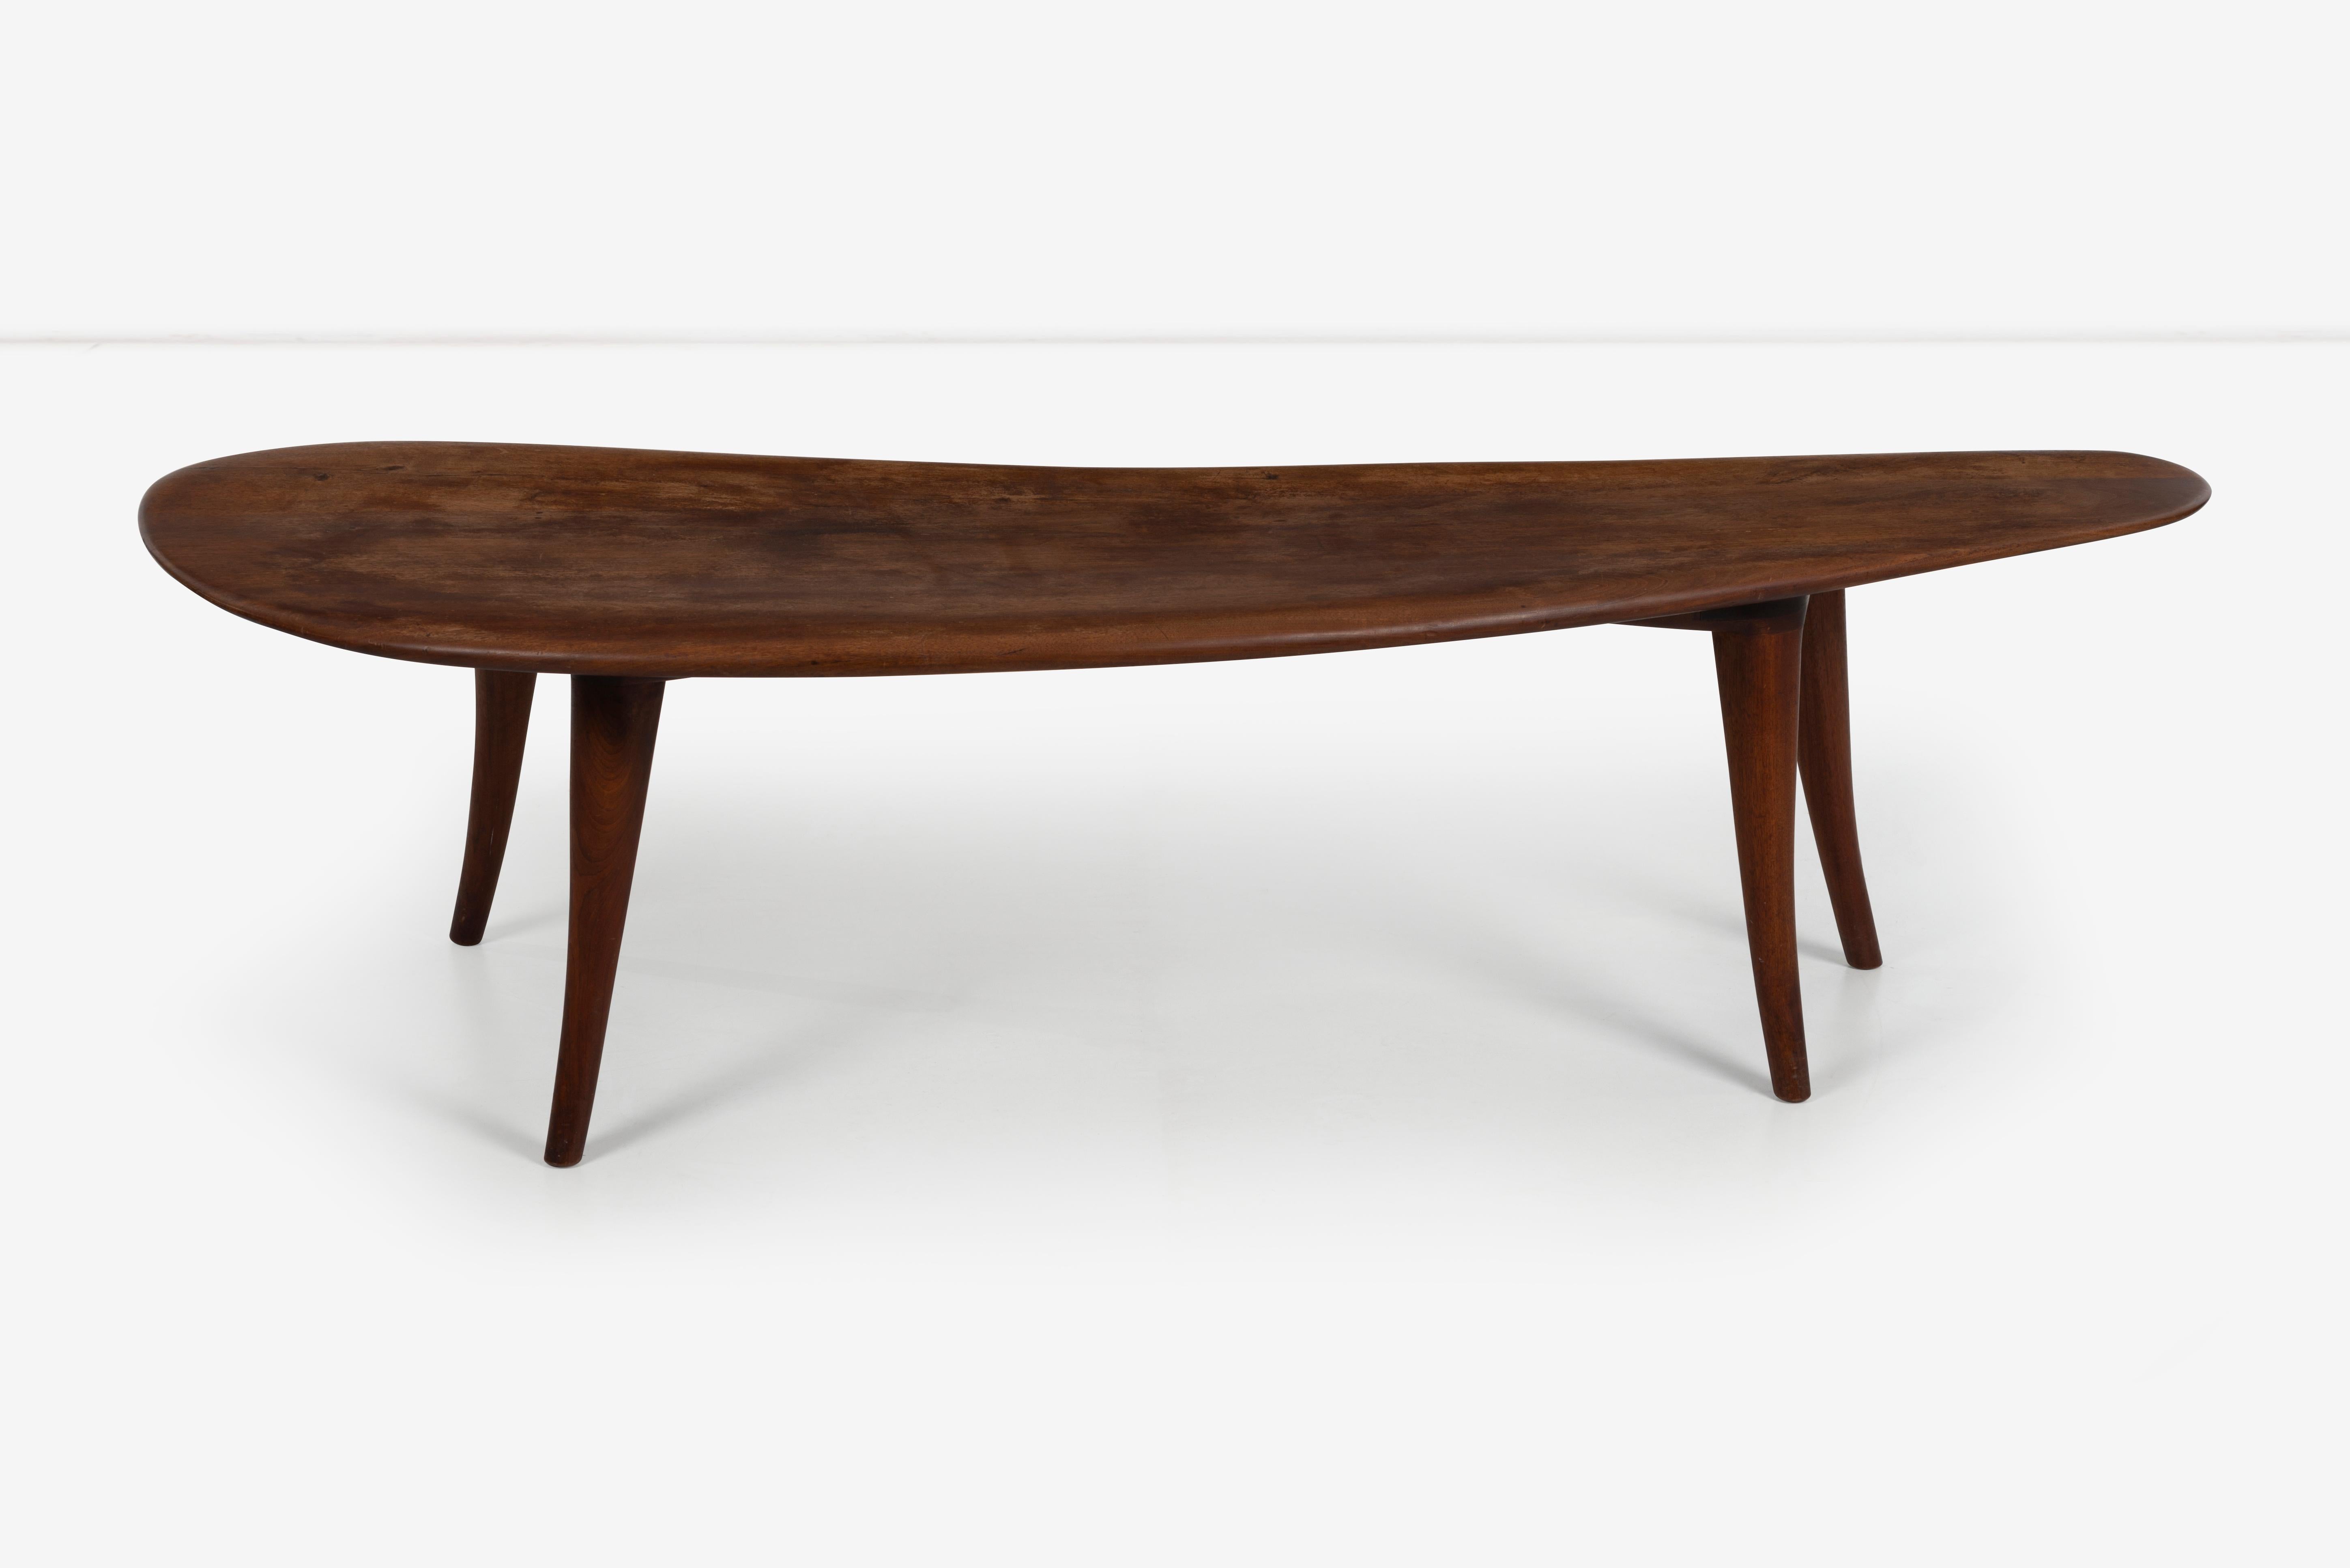 American Wharton Esherick Large Sculpted Walnut Coffee Table For Sale